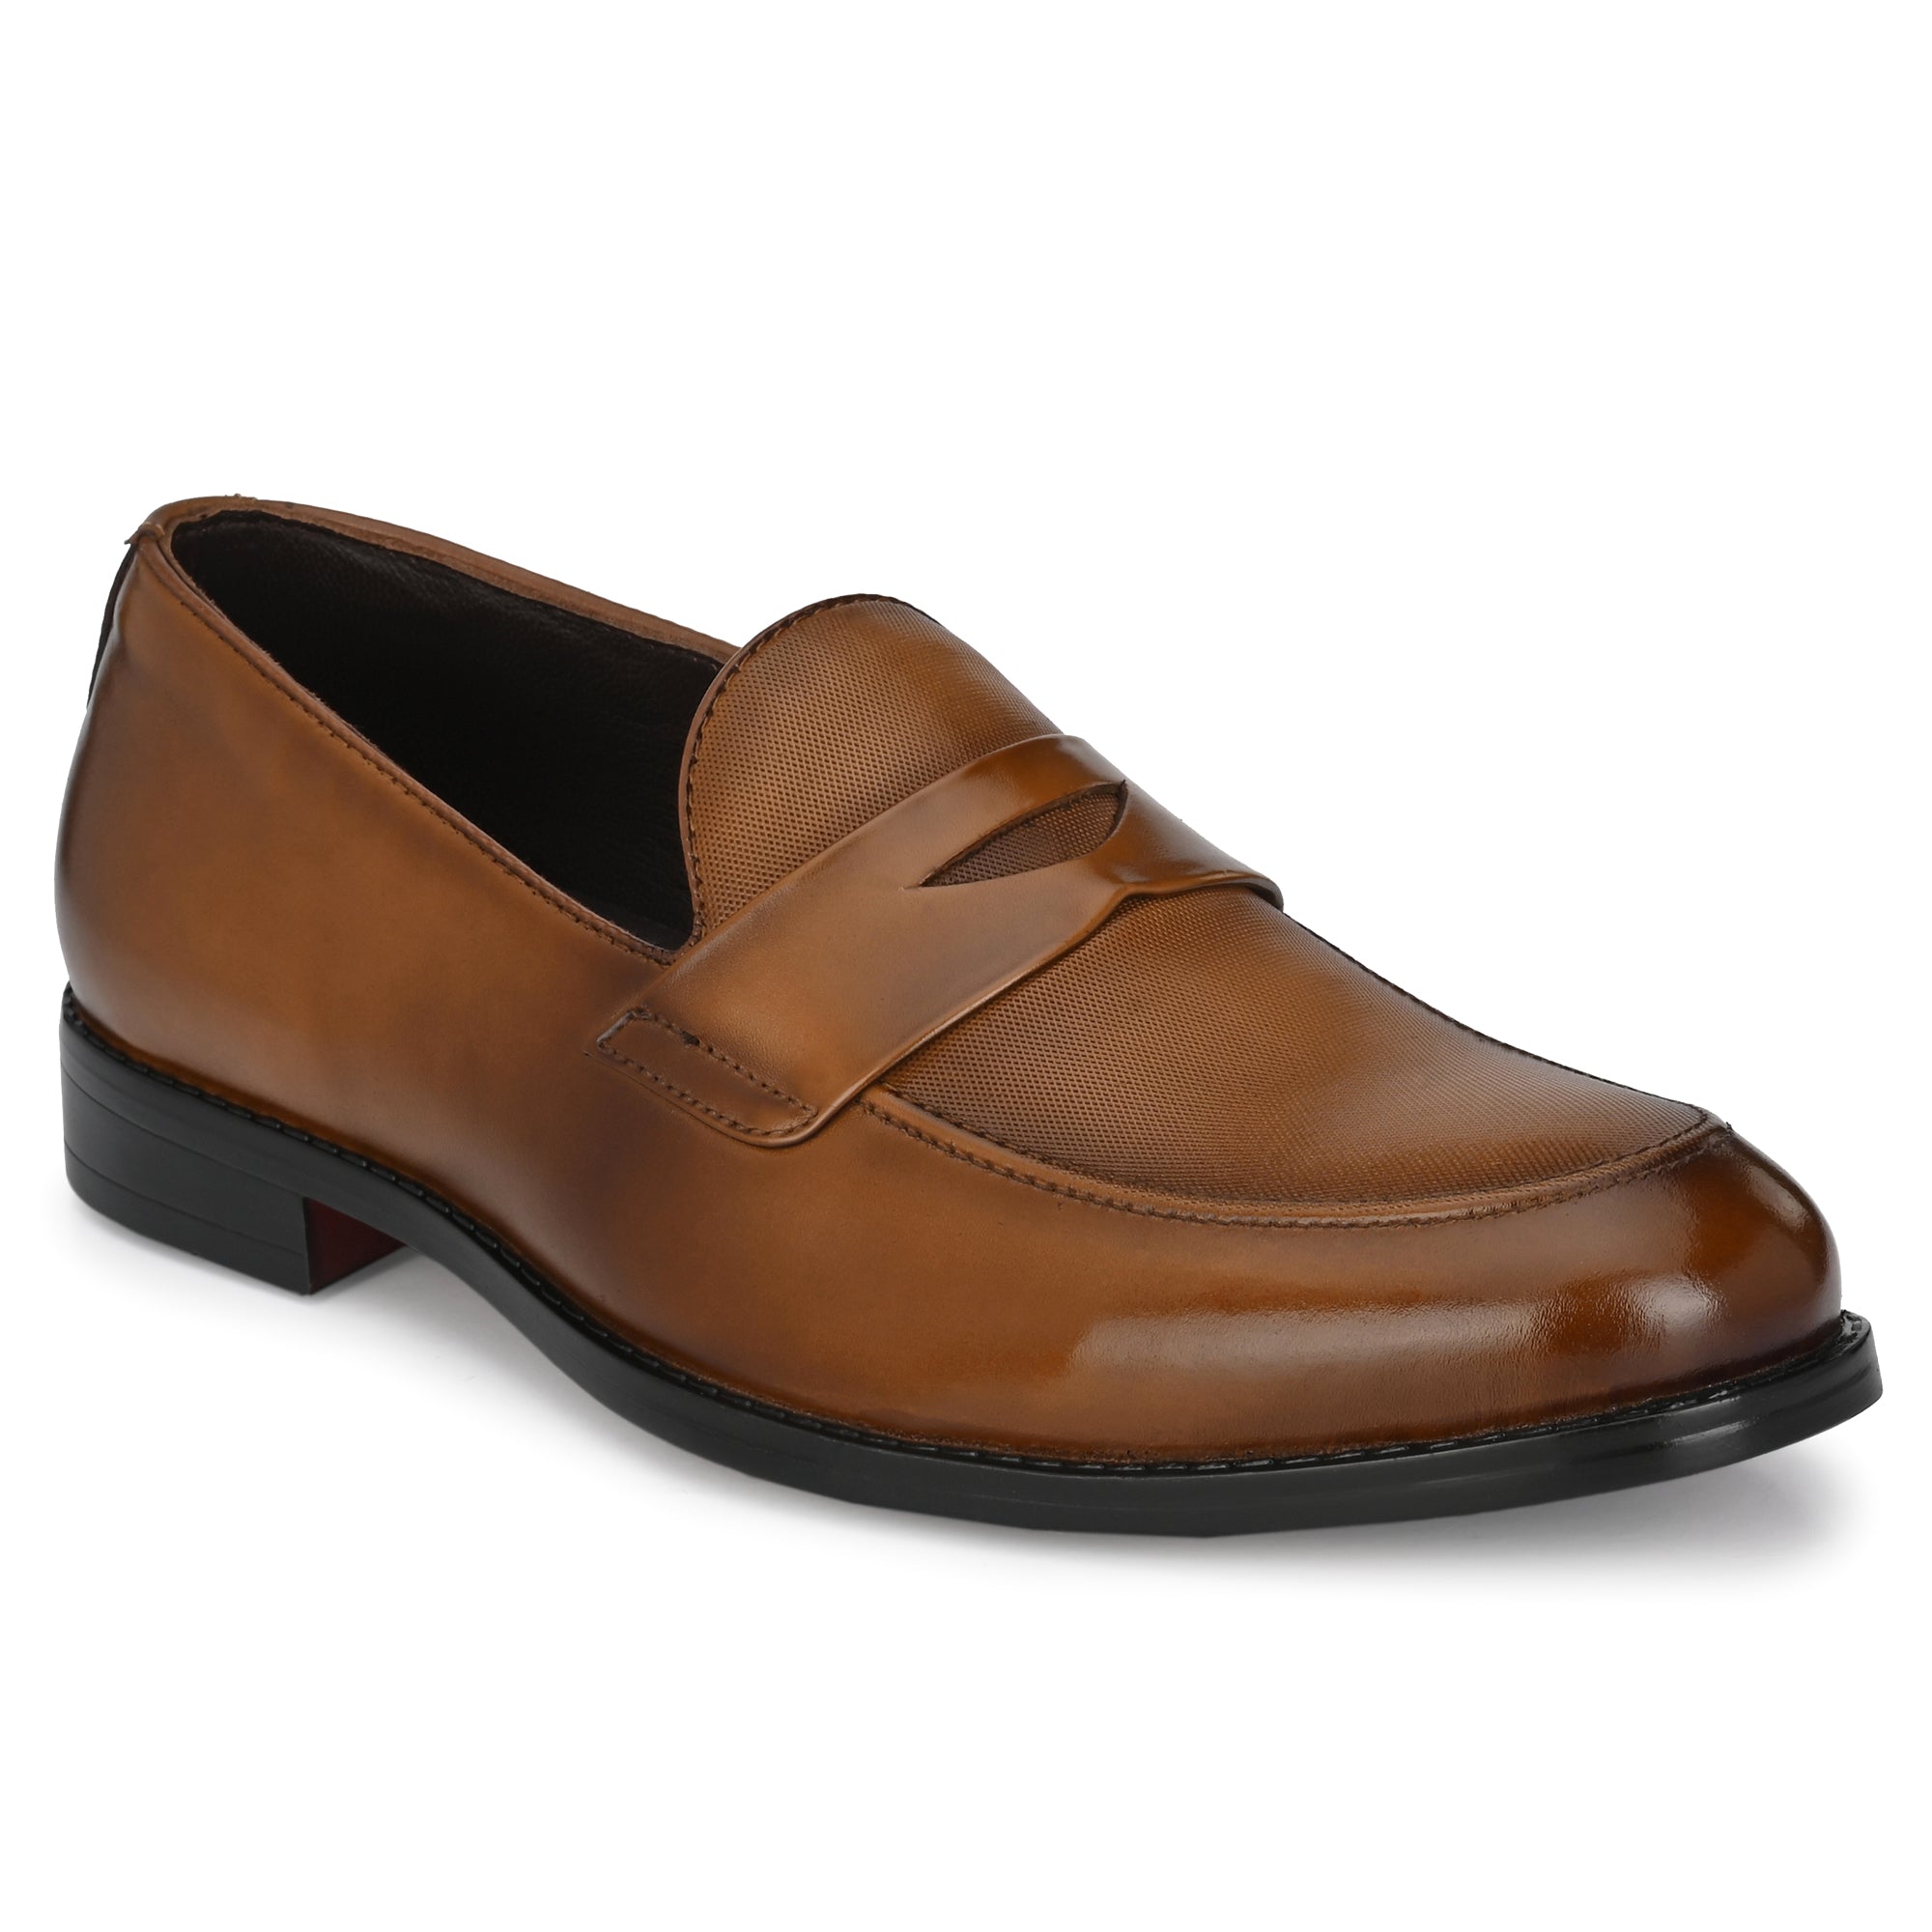 Egoss Formal Penny Loafers For Men with Textured Top